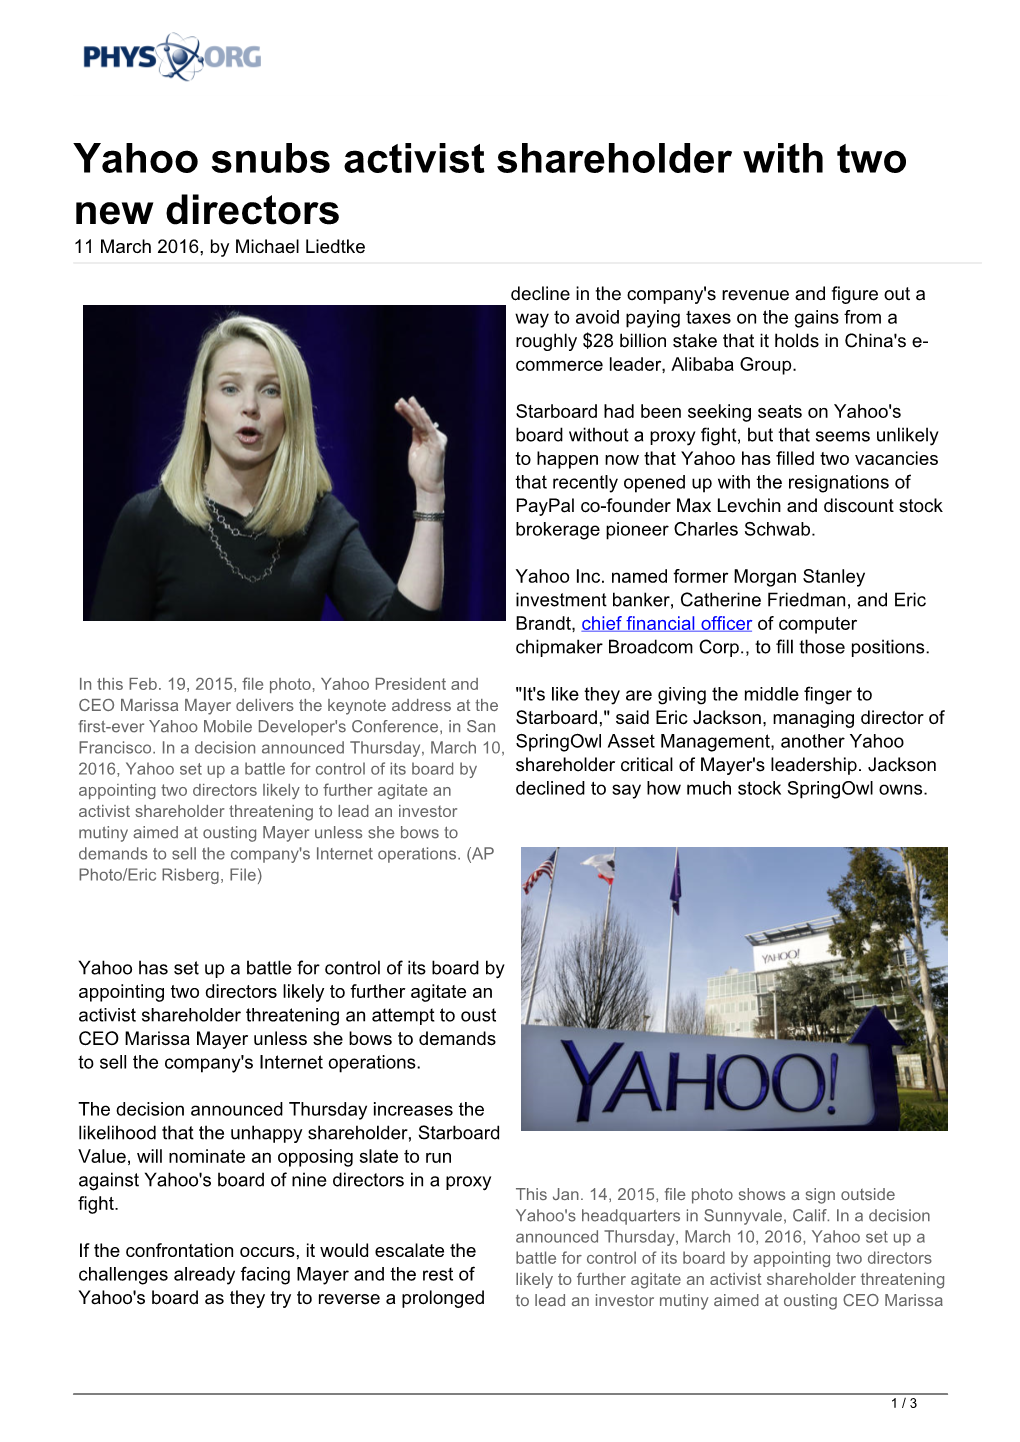 Yahoo Snubs Activist Shareholder with Two New Directors 11 March 2016, by Michael Liedtke